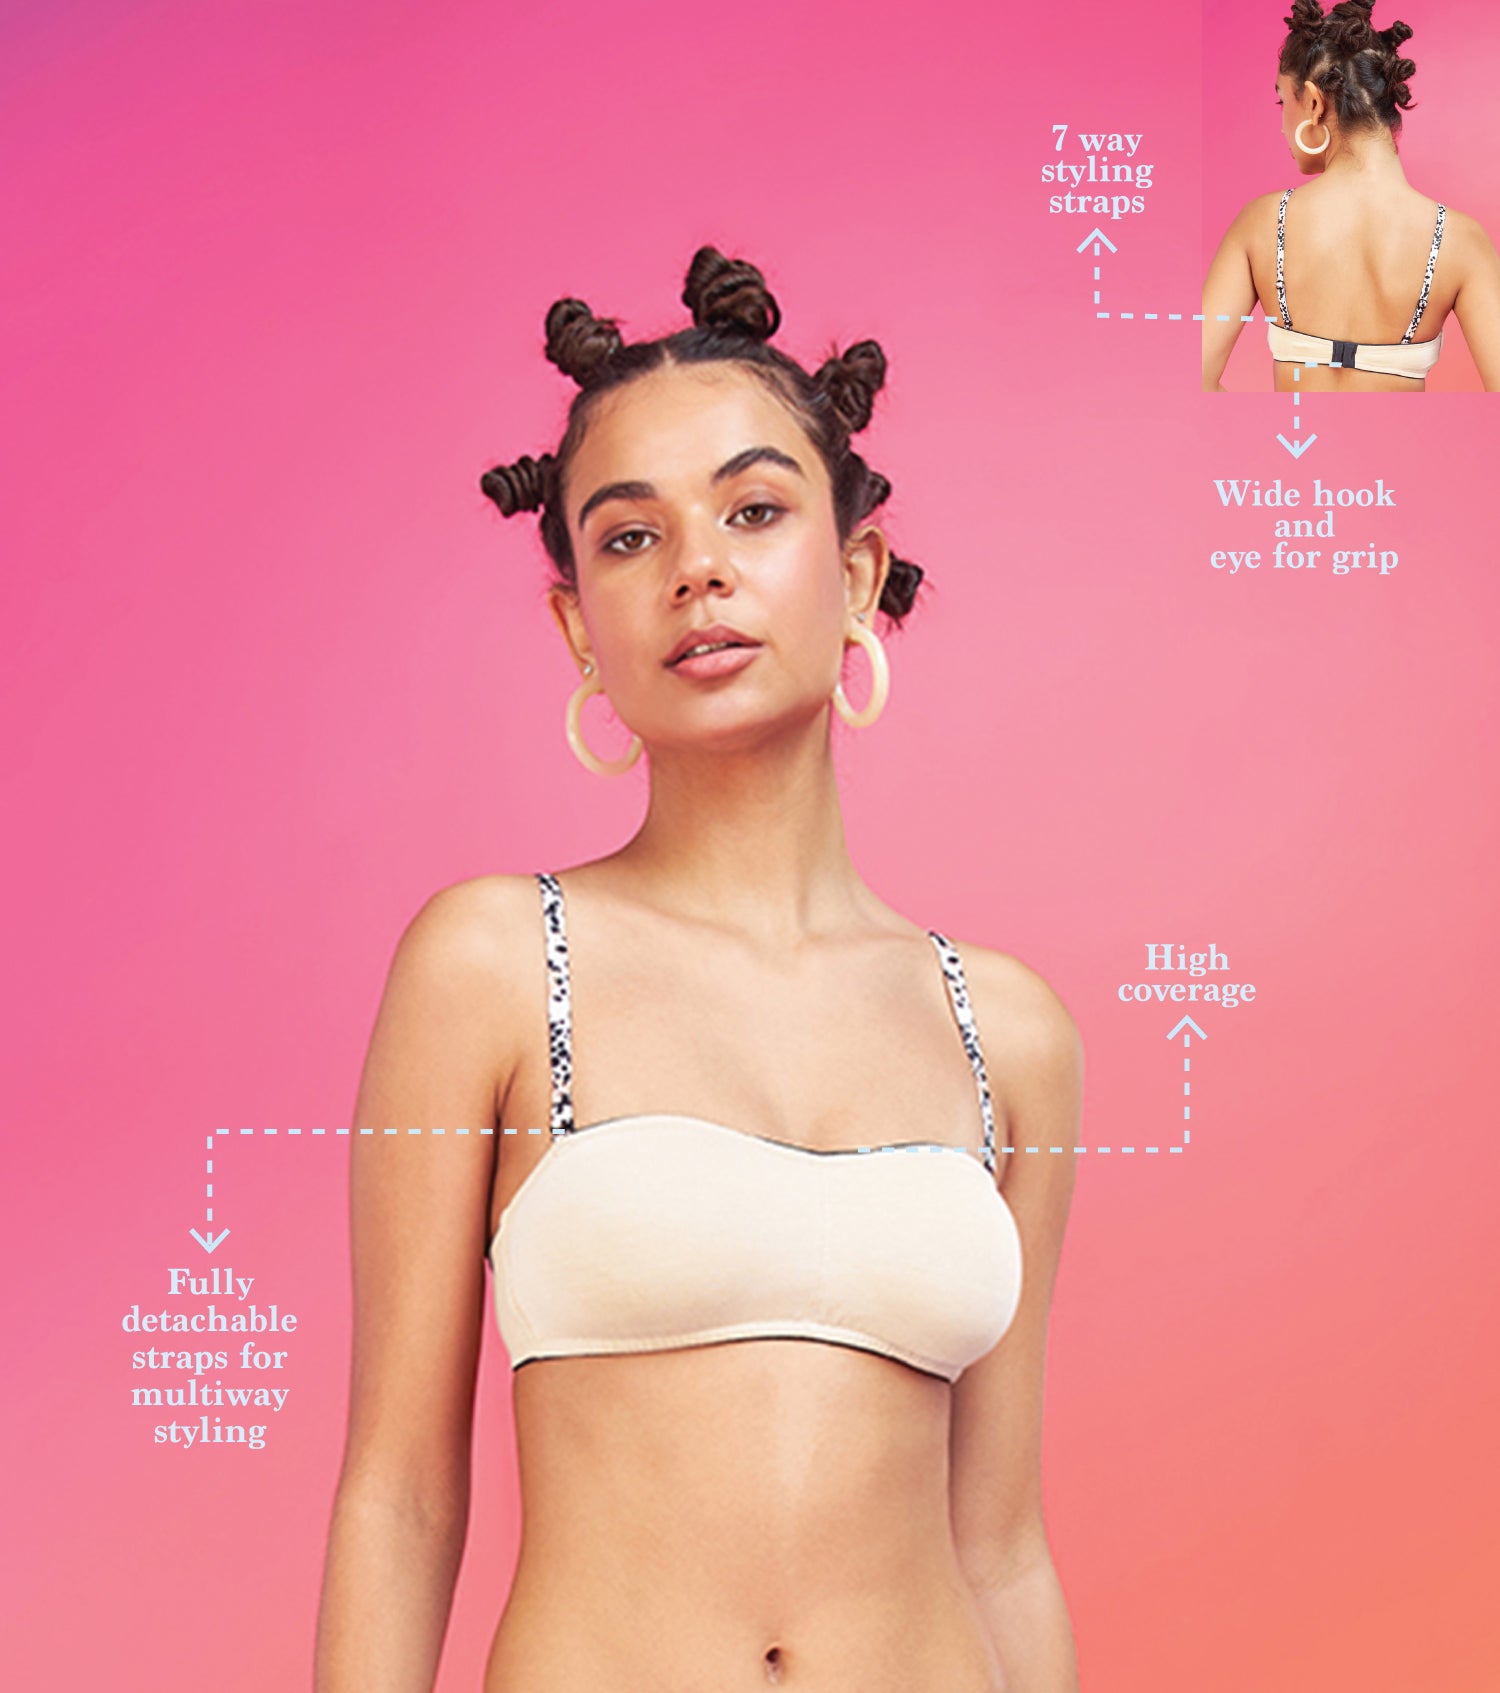 Enamor XO Toasted Almond Non-Wired Non Padded Multiway Bra - Nella